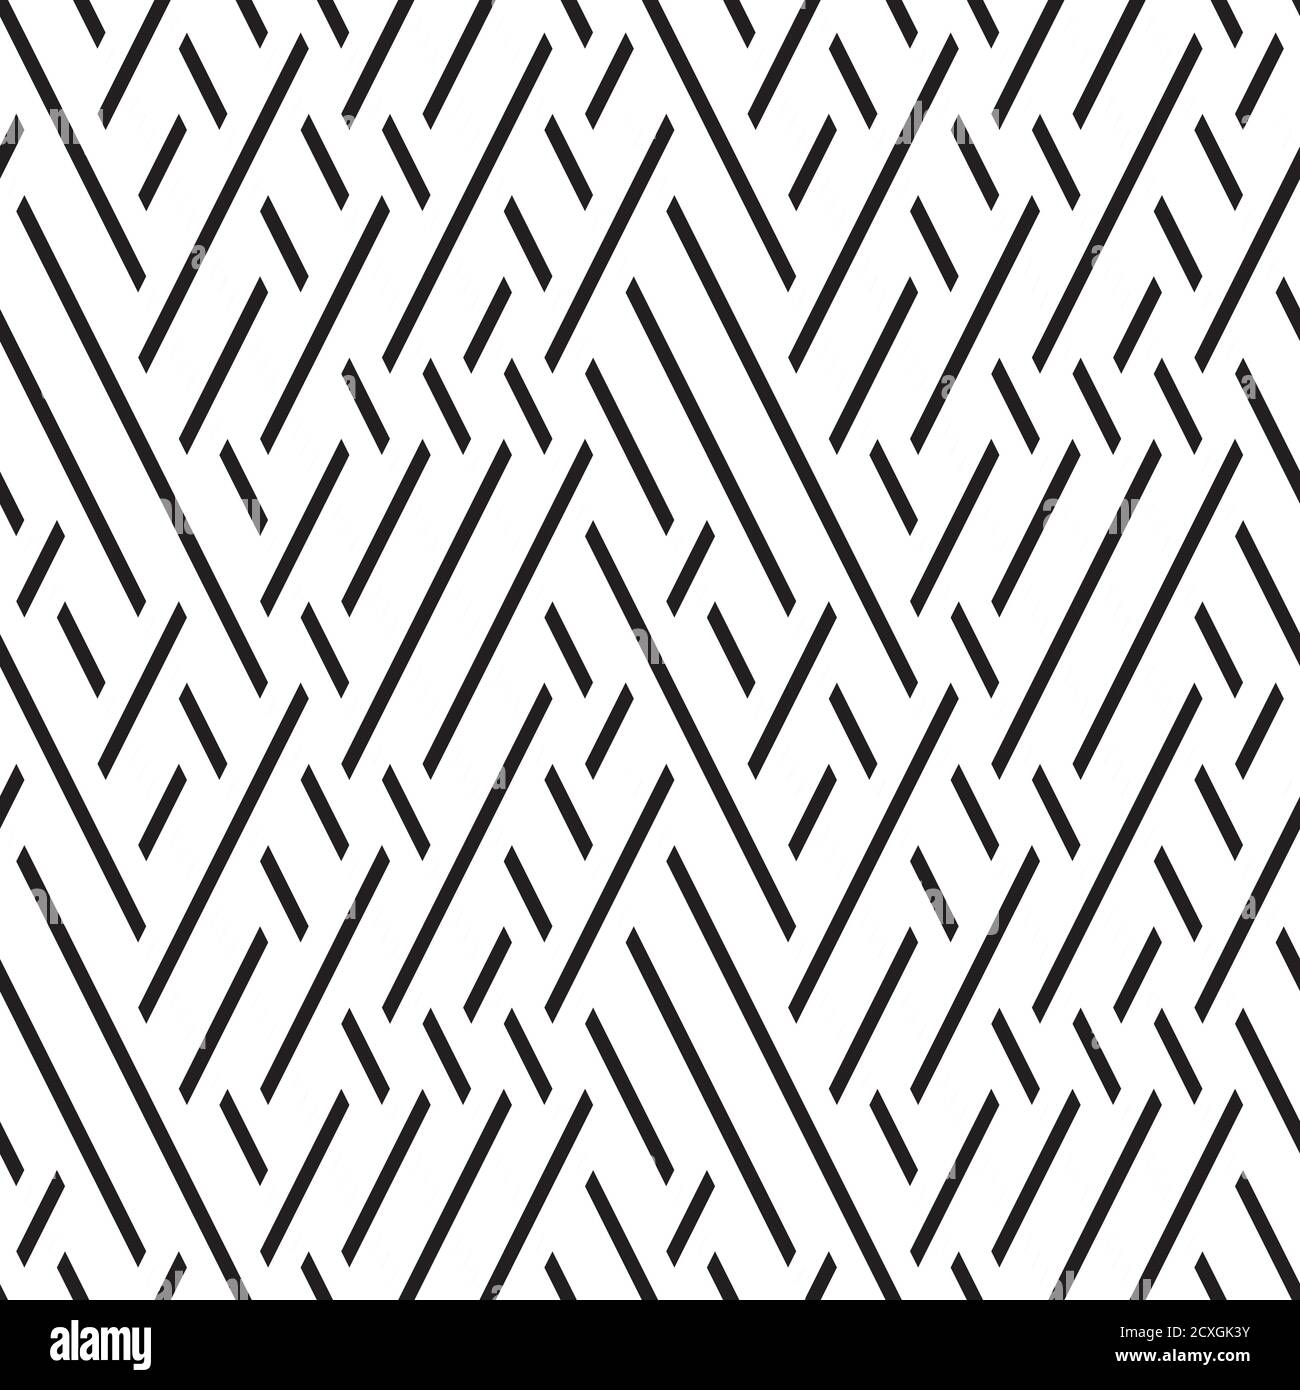 Seamless pattern with oblique black segments Stock Vector